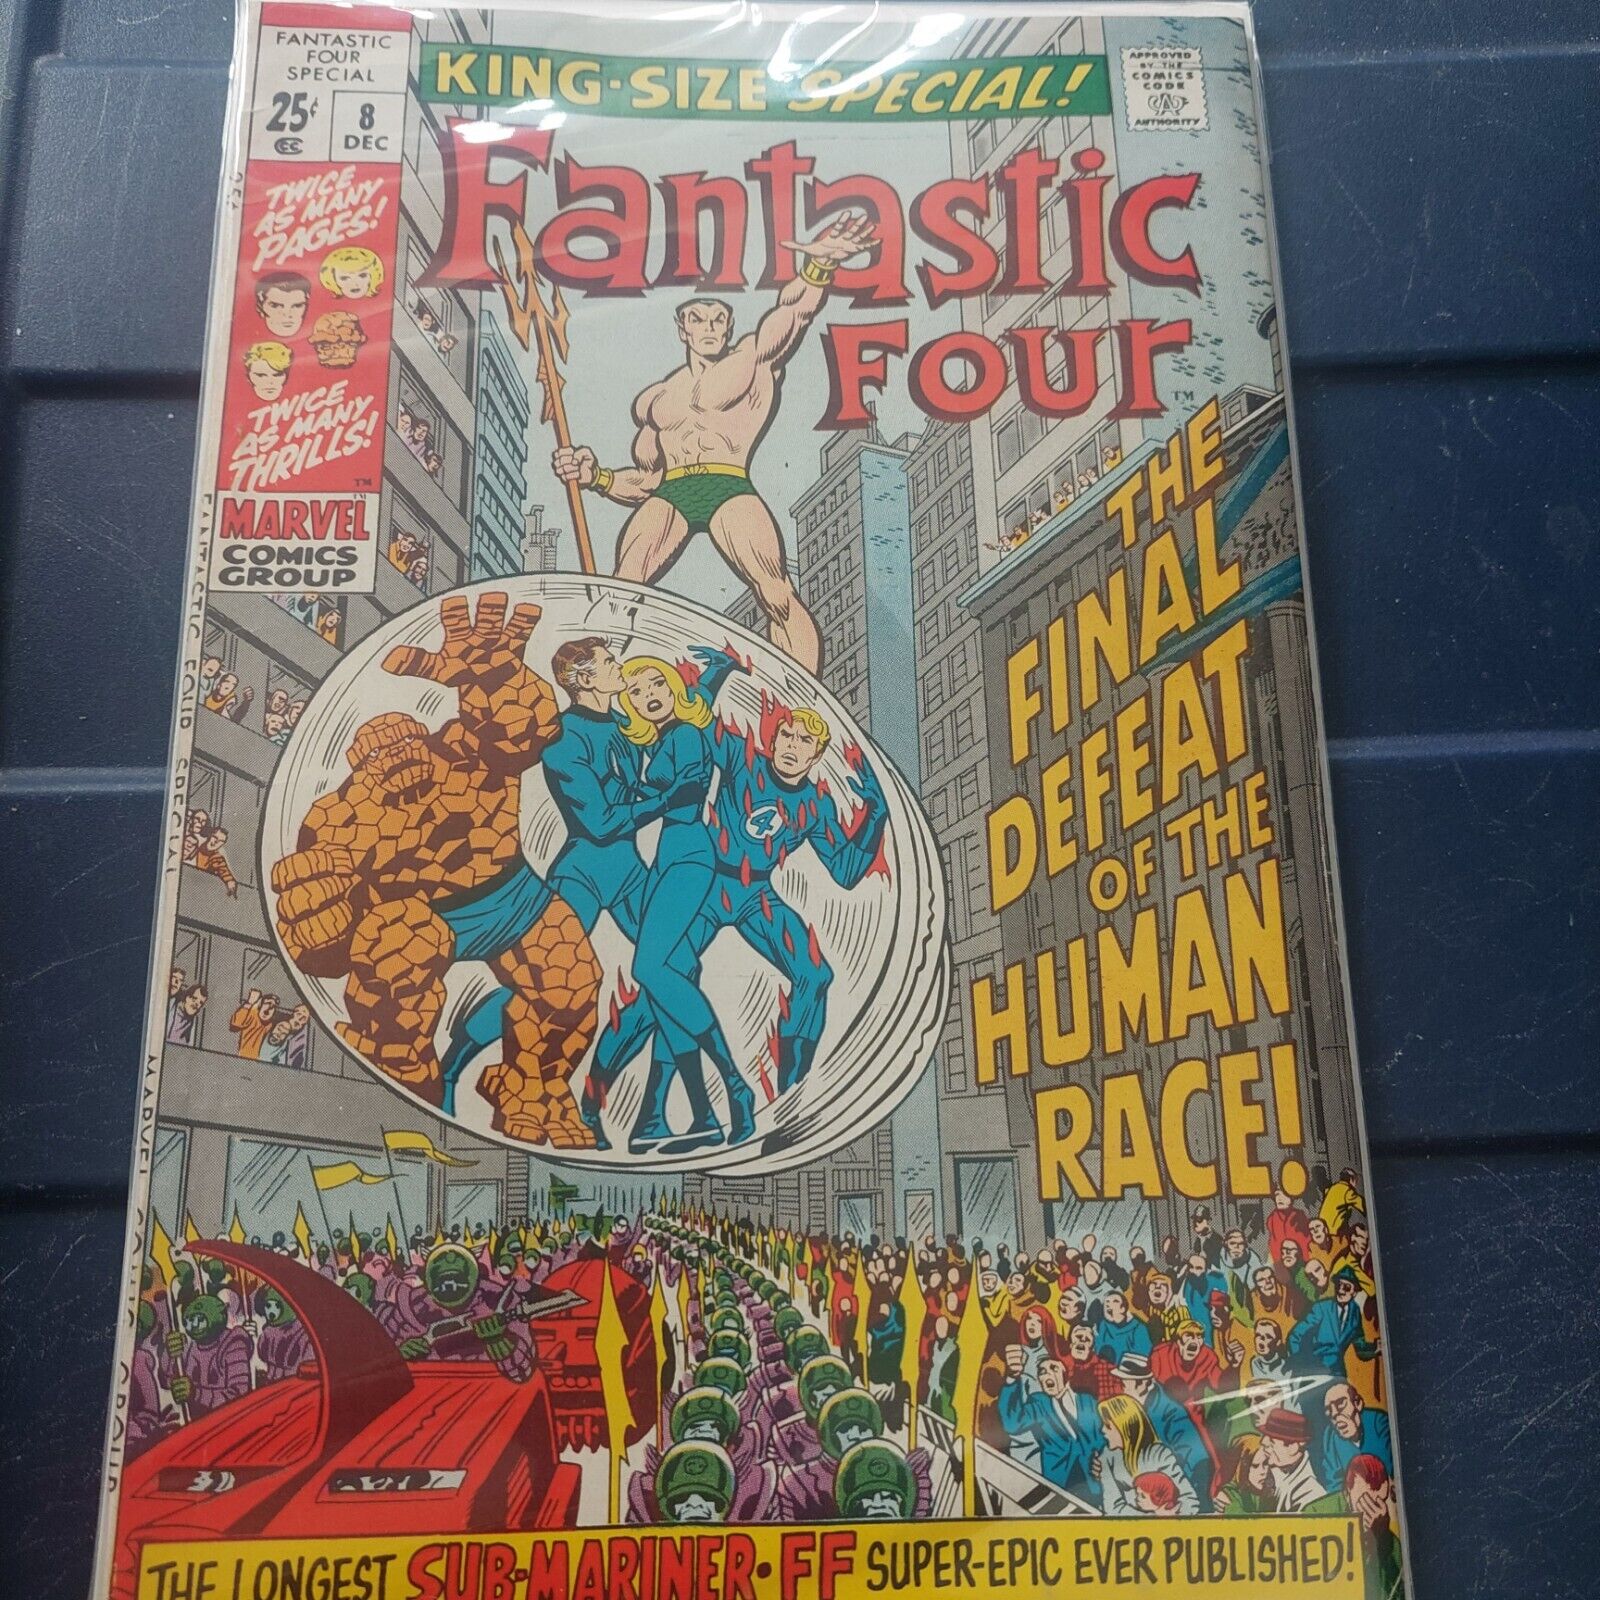 Fantastic Four Annual #8 MARVEL 1970 King-Size Special FN+ STAN LEE/JACK KIRBY